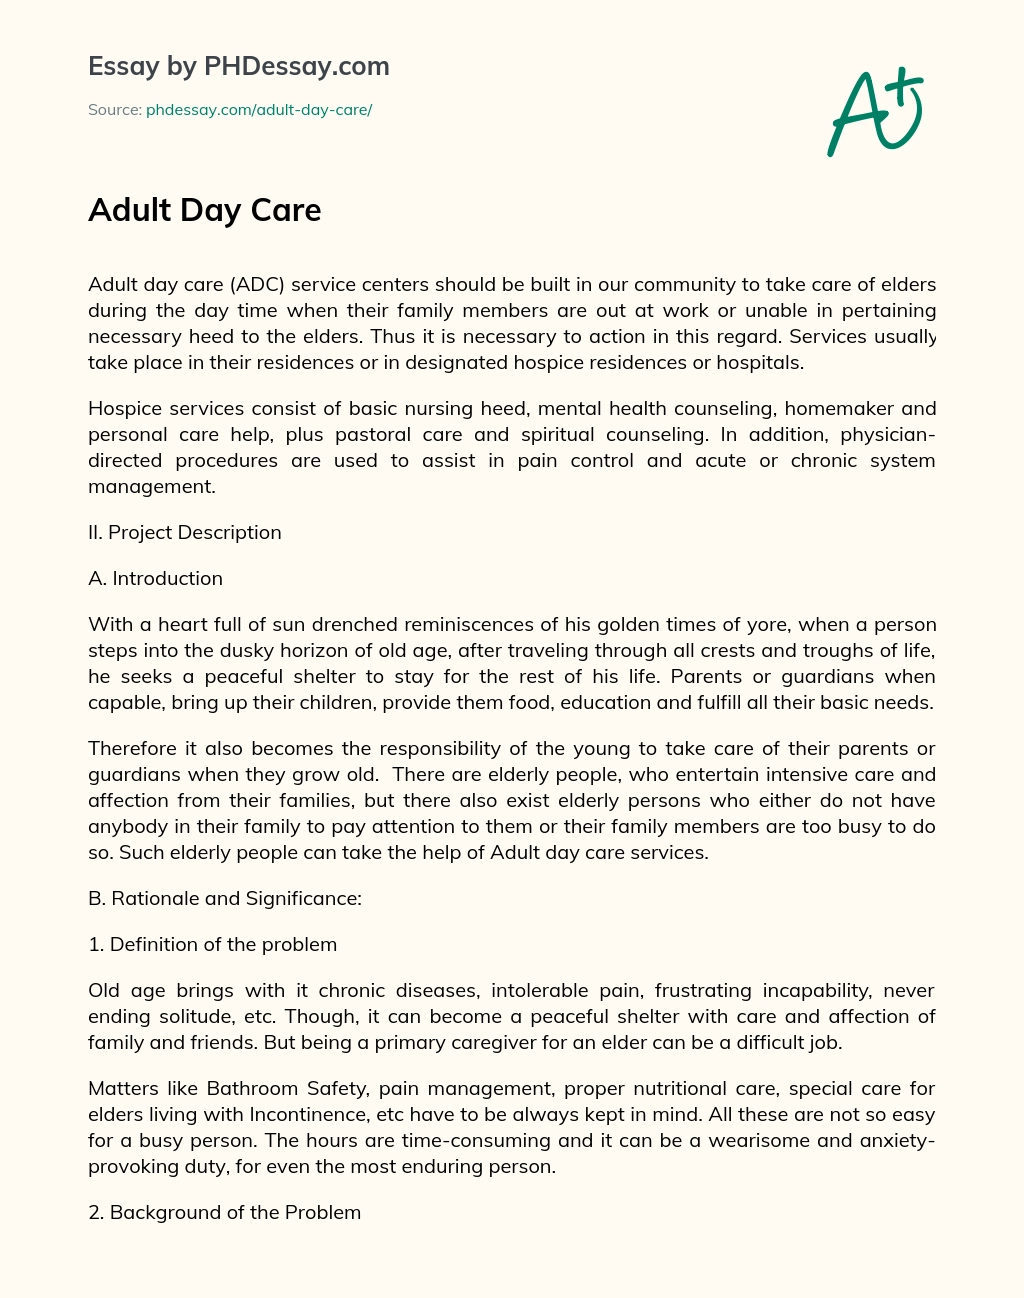 Adult Day Care essay